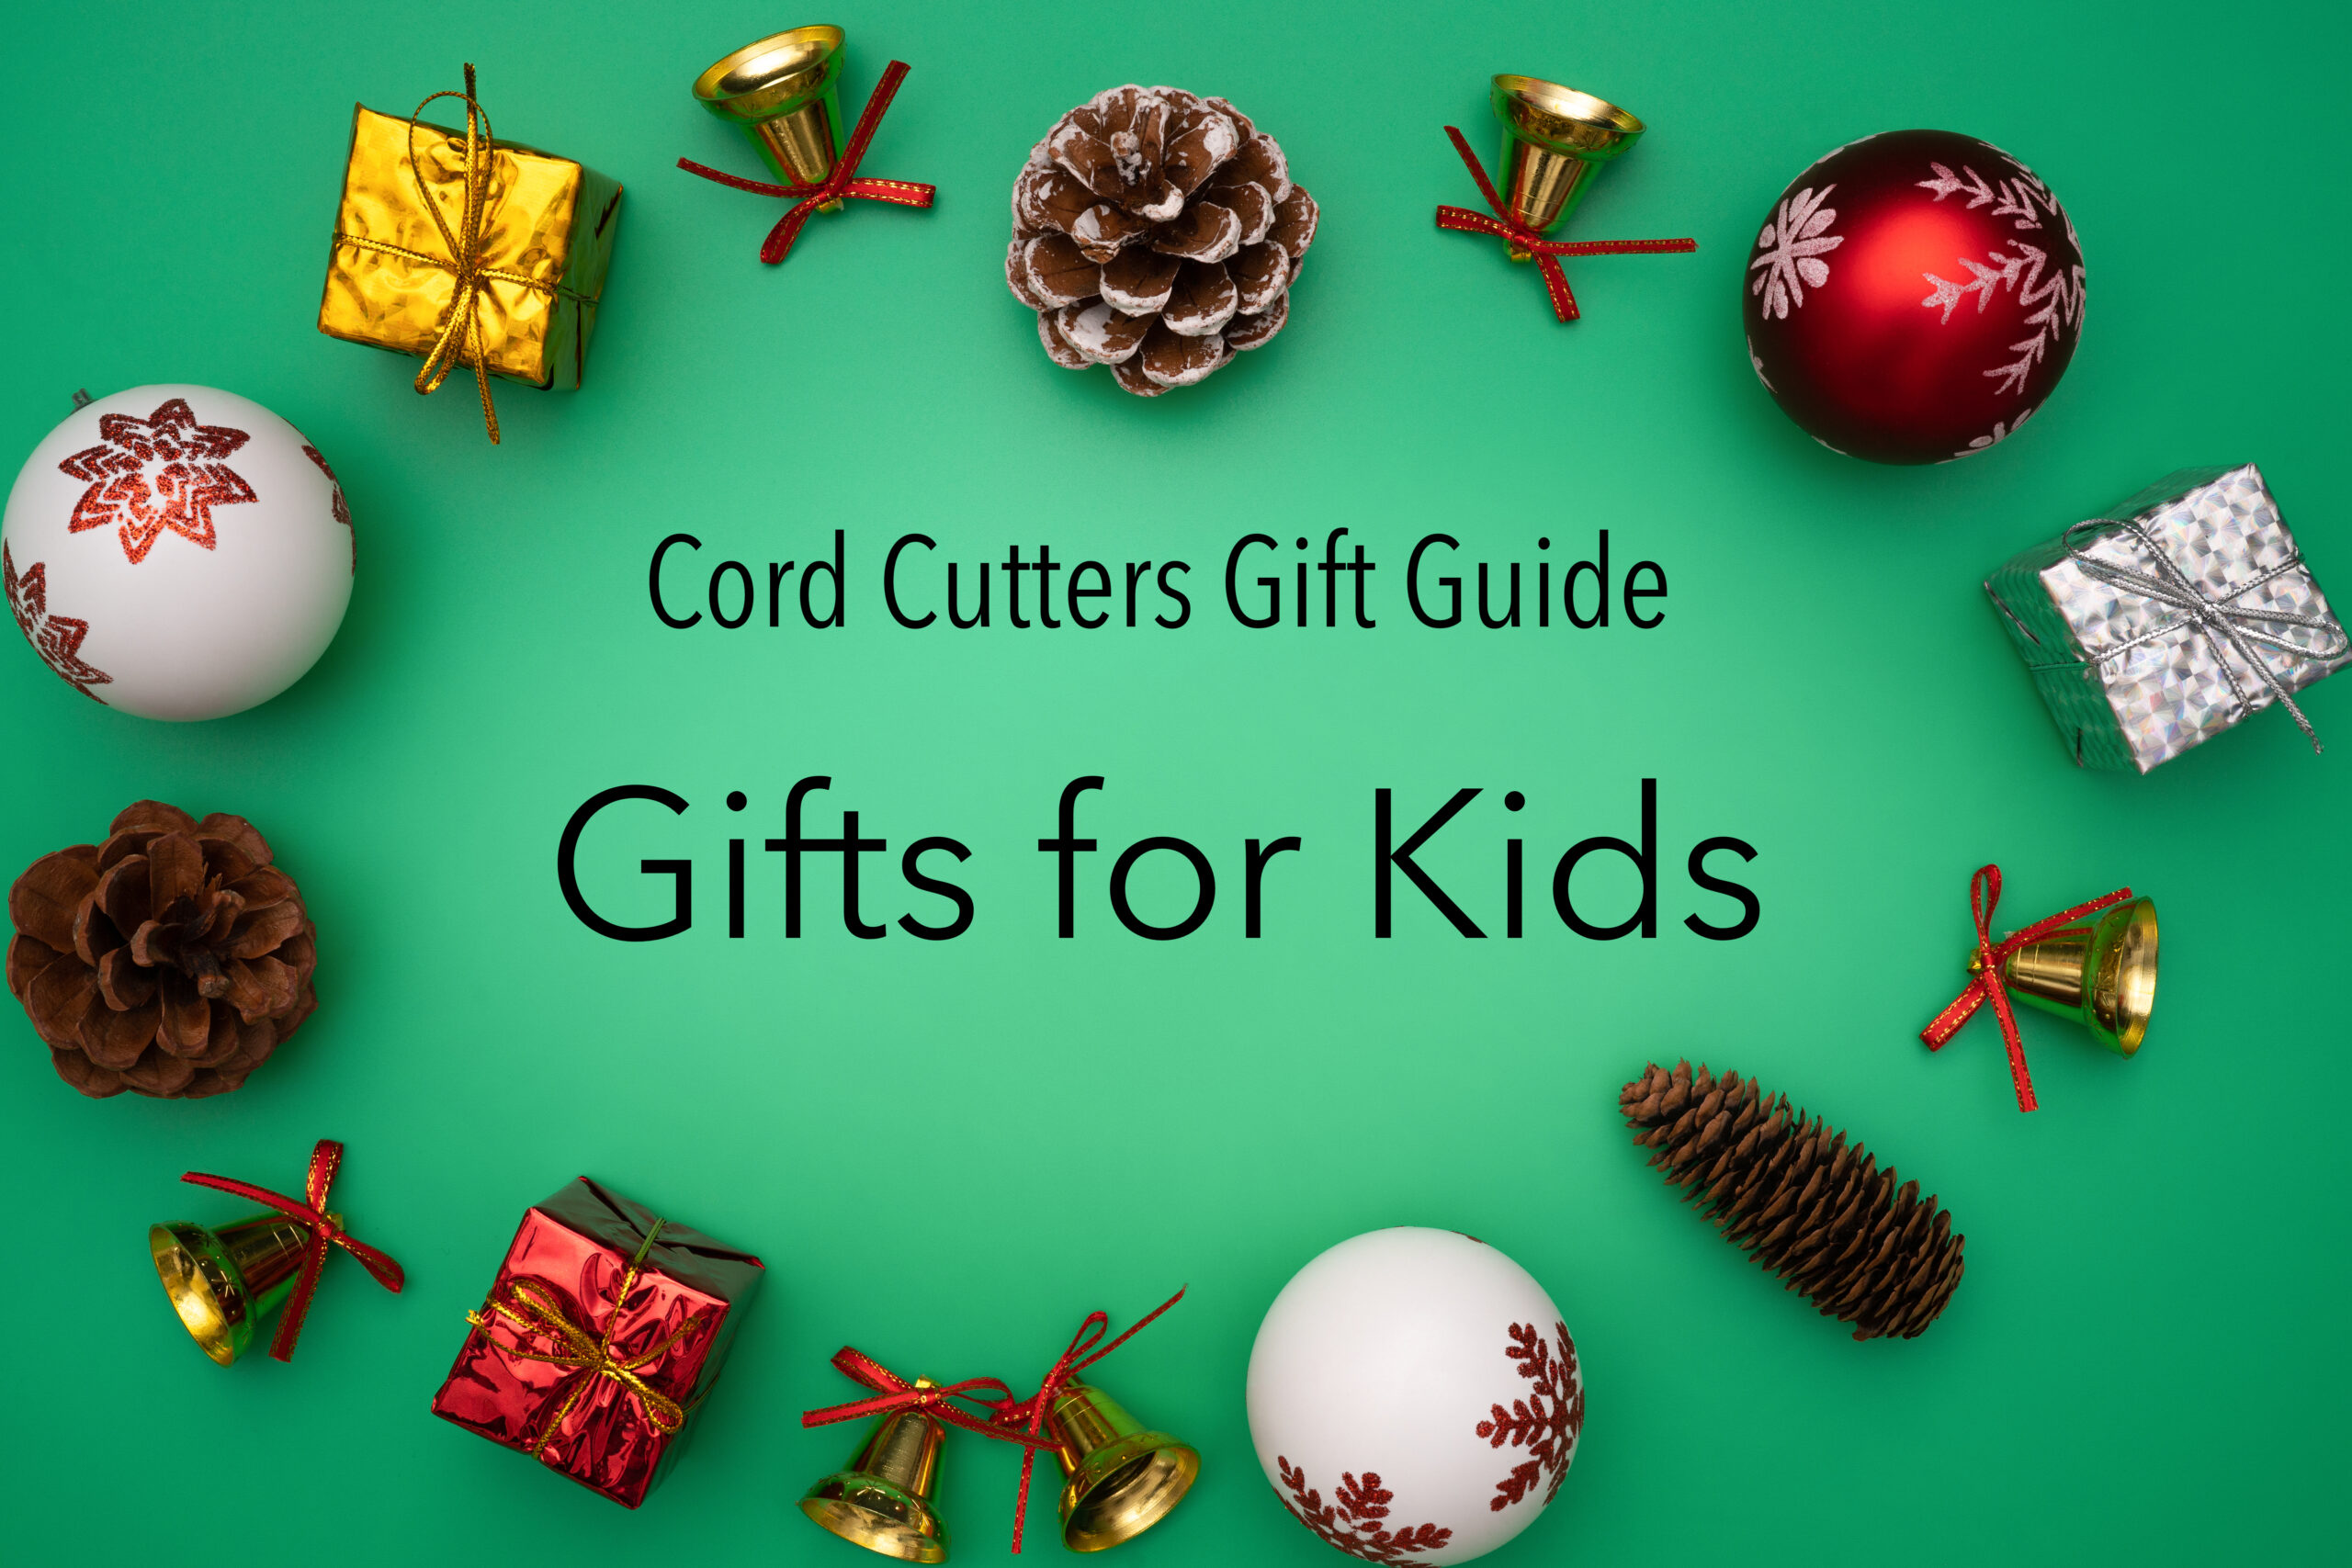 Top 10 Cord Cutting Gifts for Kids and Families